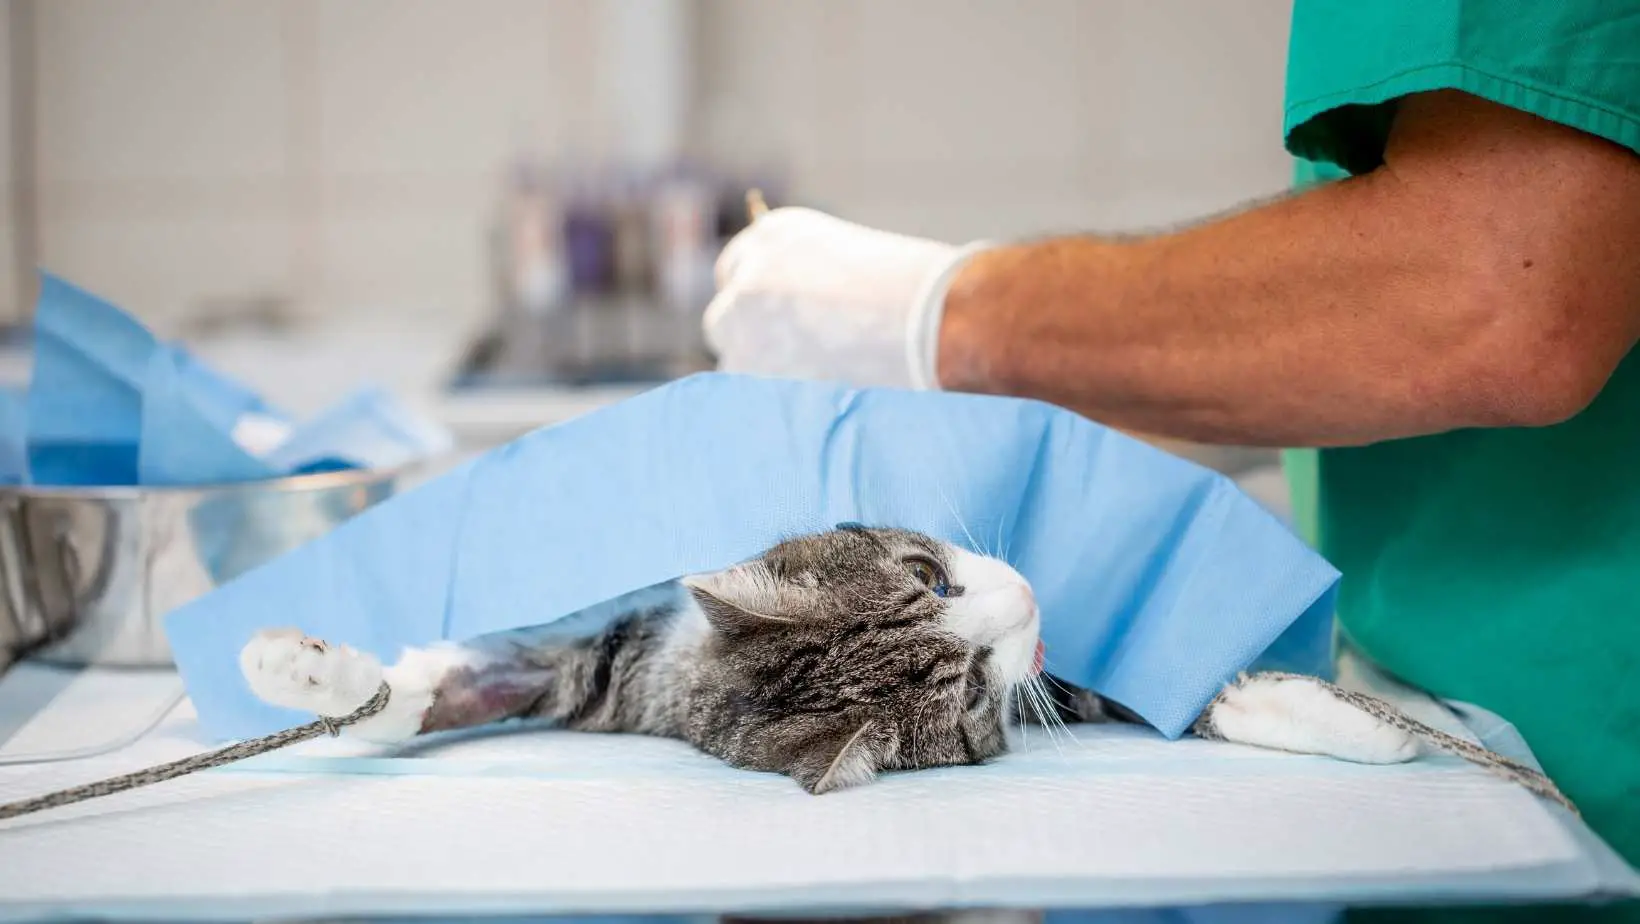 What does a male cat look like after being neutered?